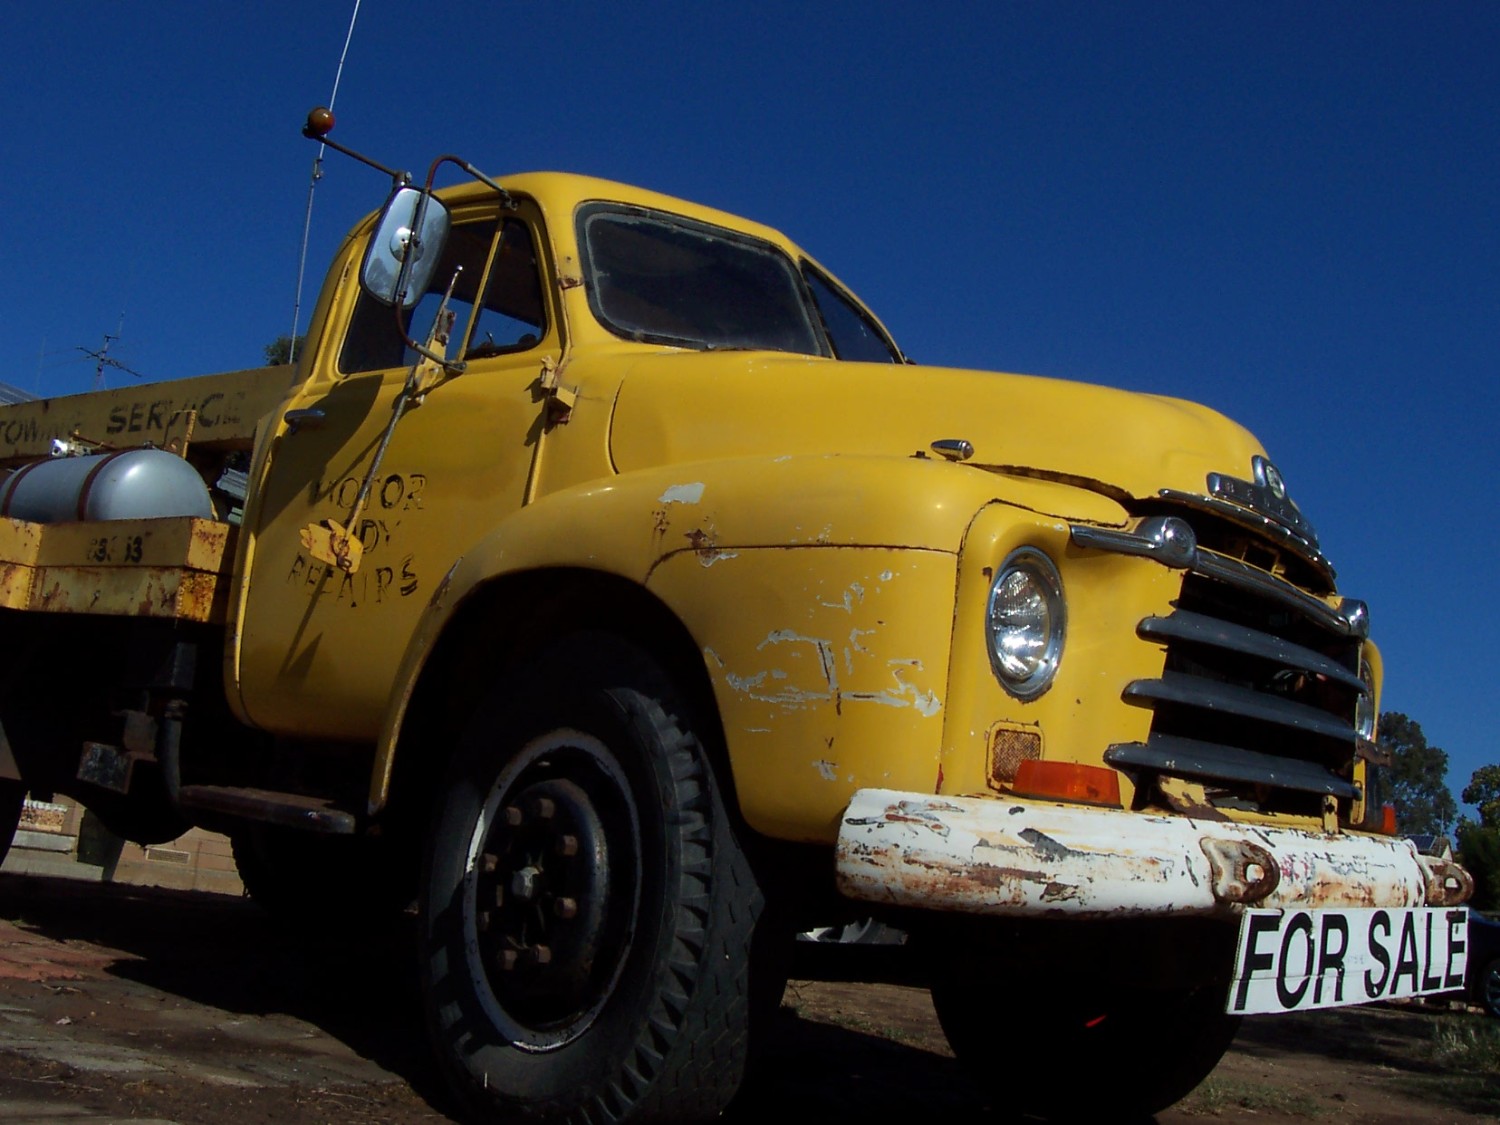 1957 Bedford D5 tow-truck - stranger454 - Shannons Club